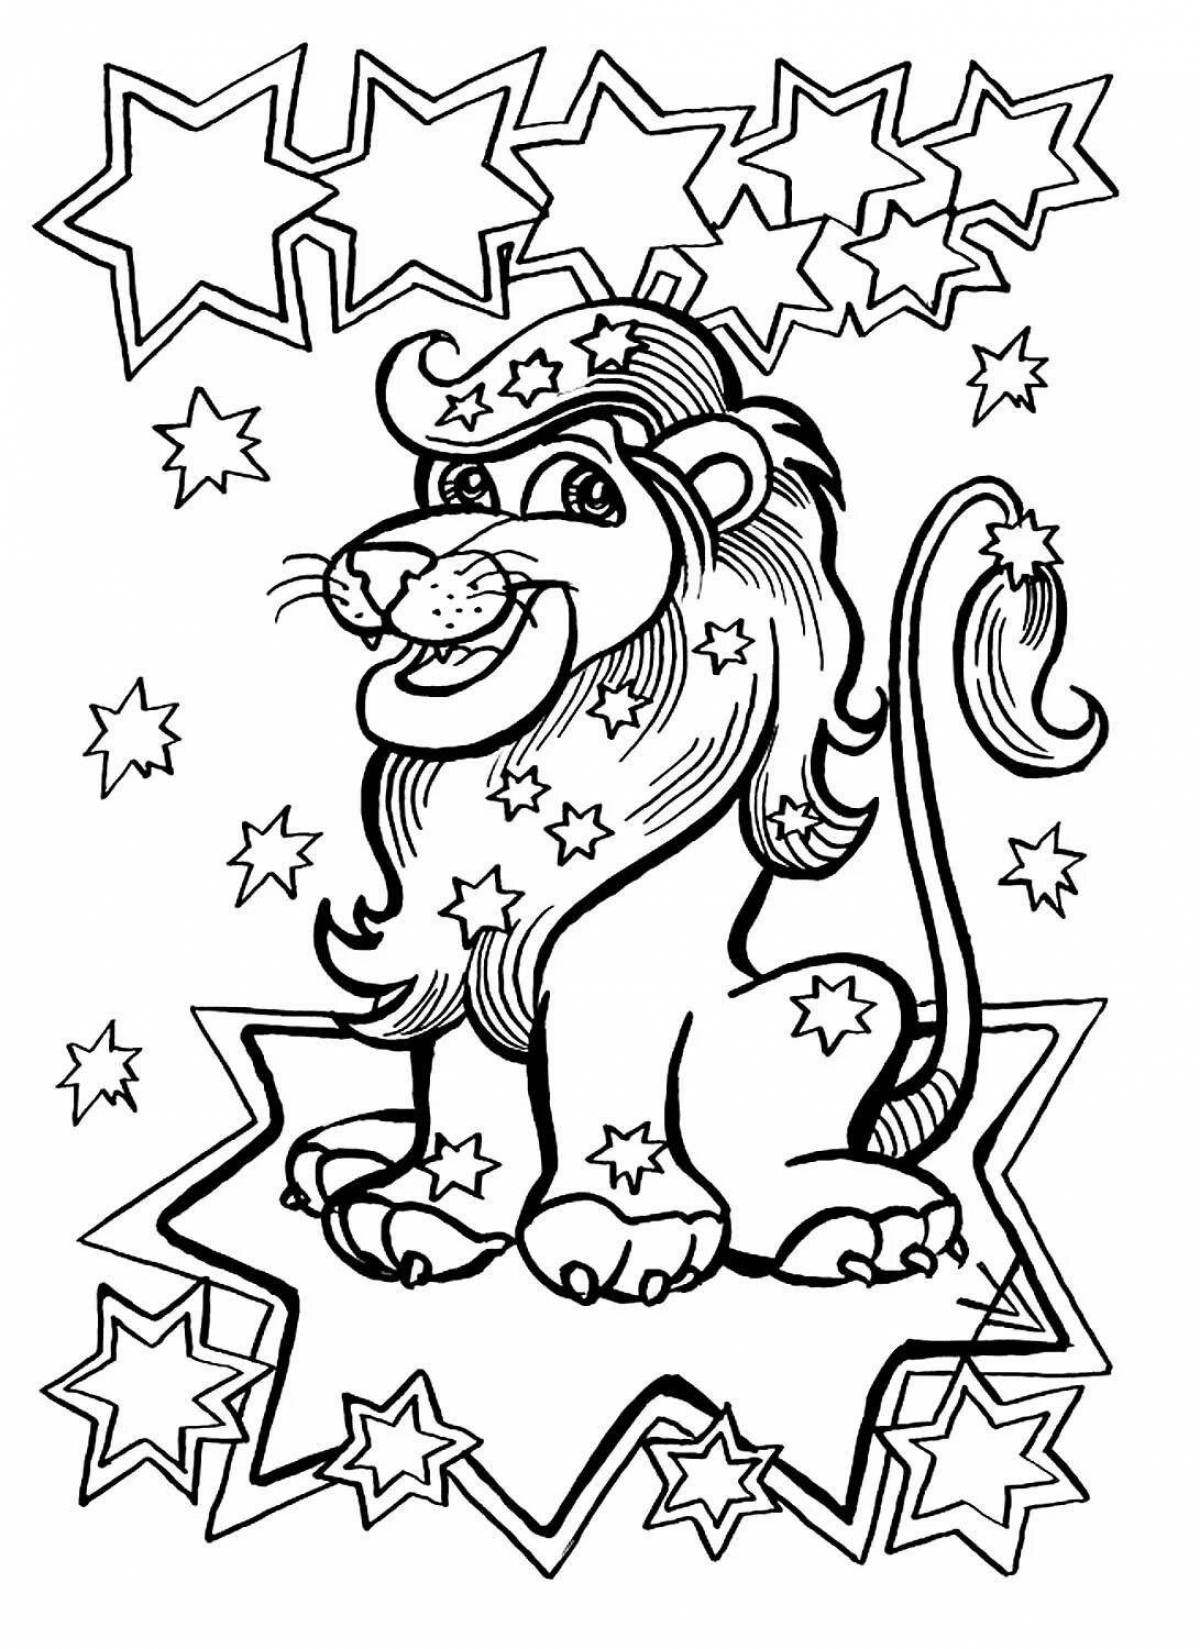 Colorful zodiac signs coloring pages for kids to explore